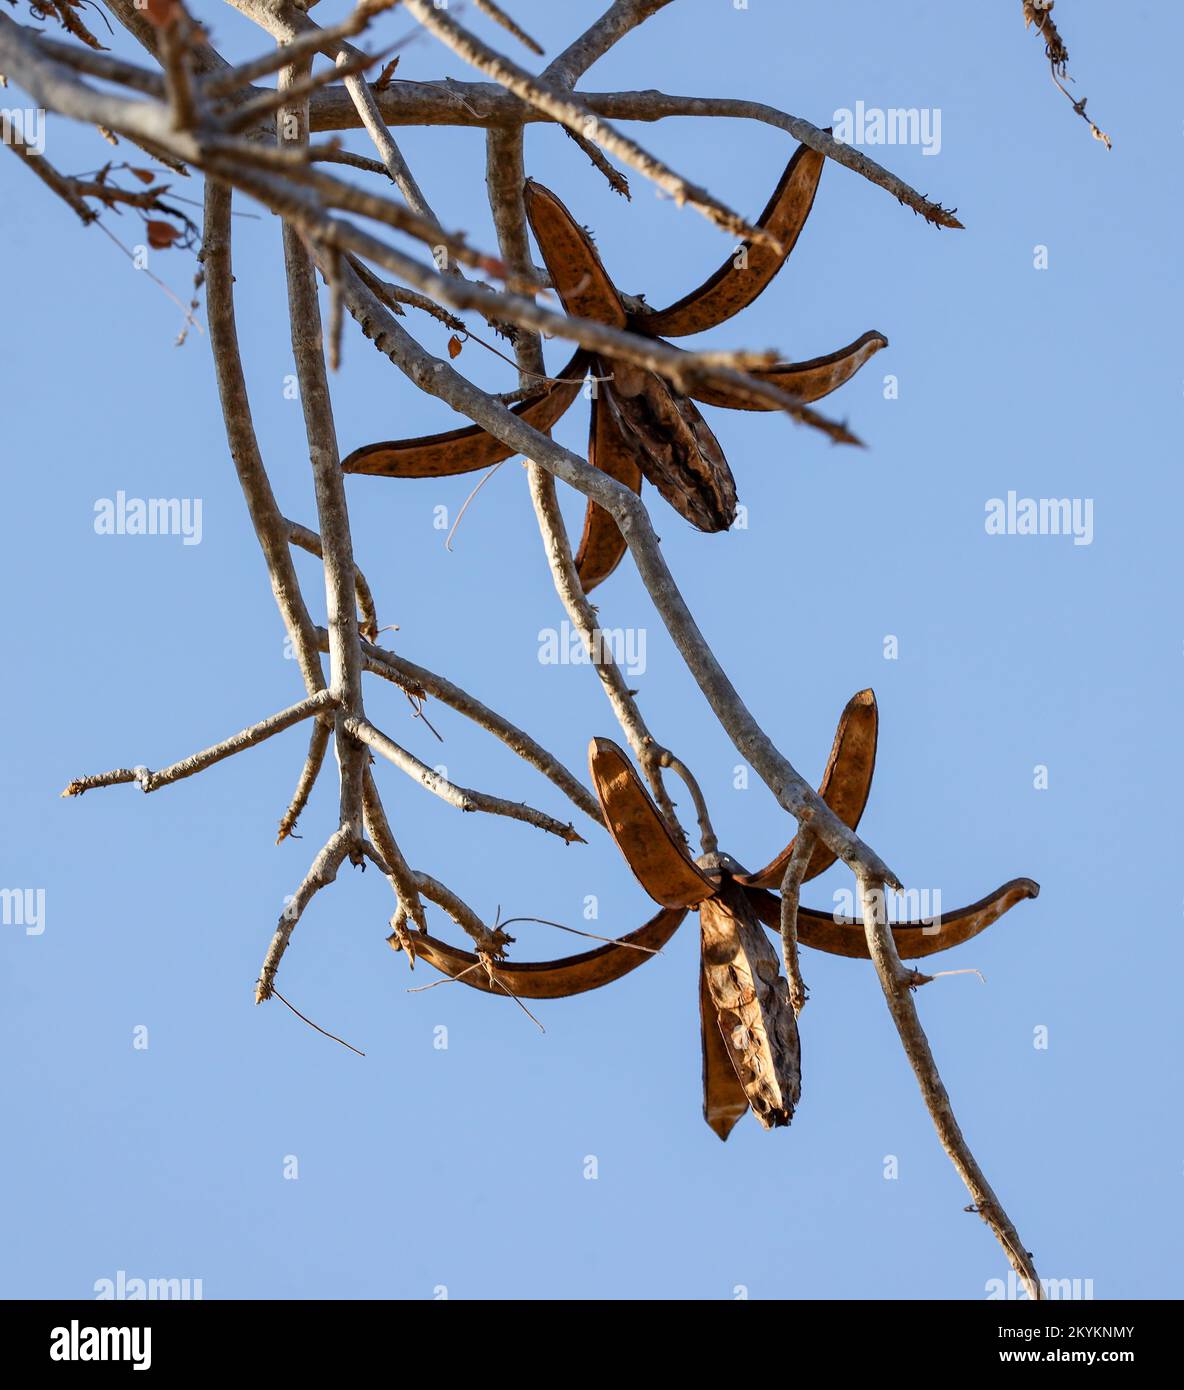 The distinctive seed pods that give the Wooden banana Tree its name. The seeds have dropped and been blown away from the parent tree by the wind. Stock Photo